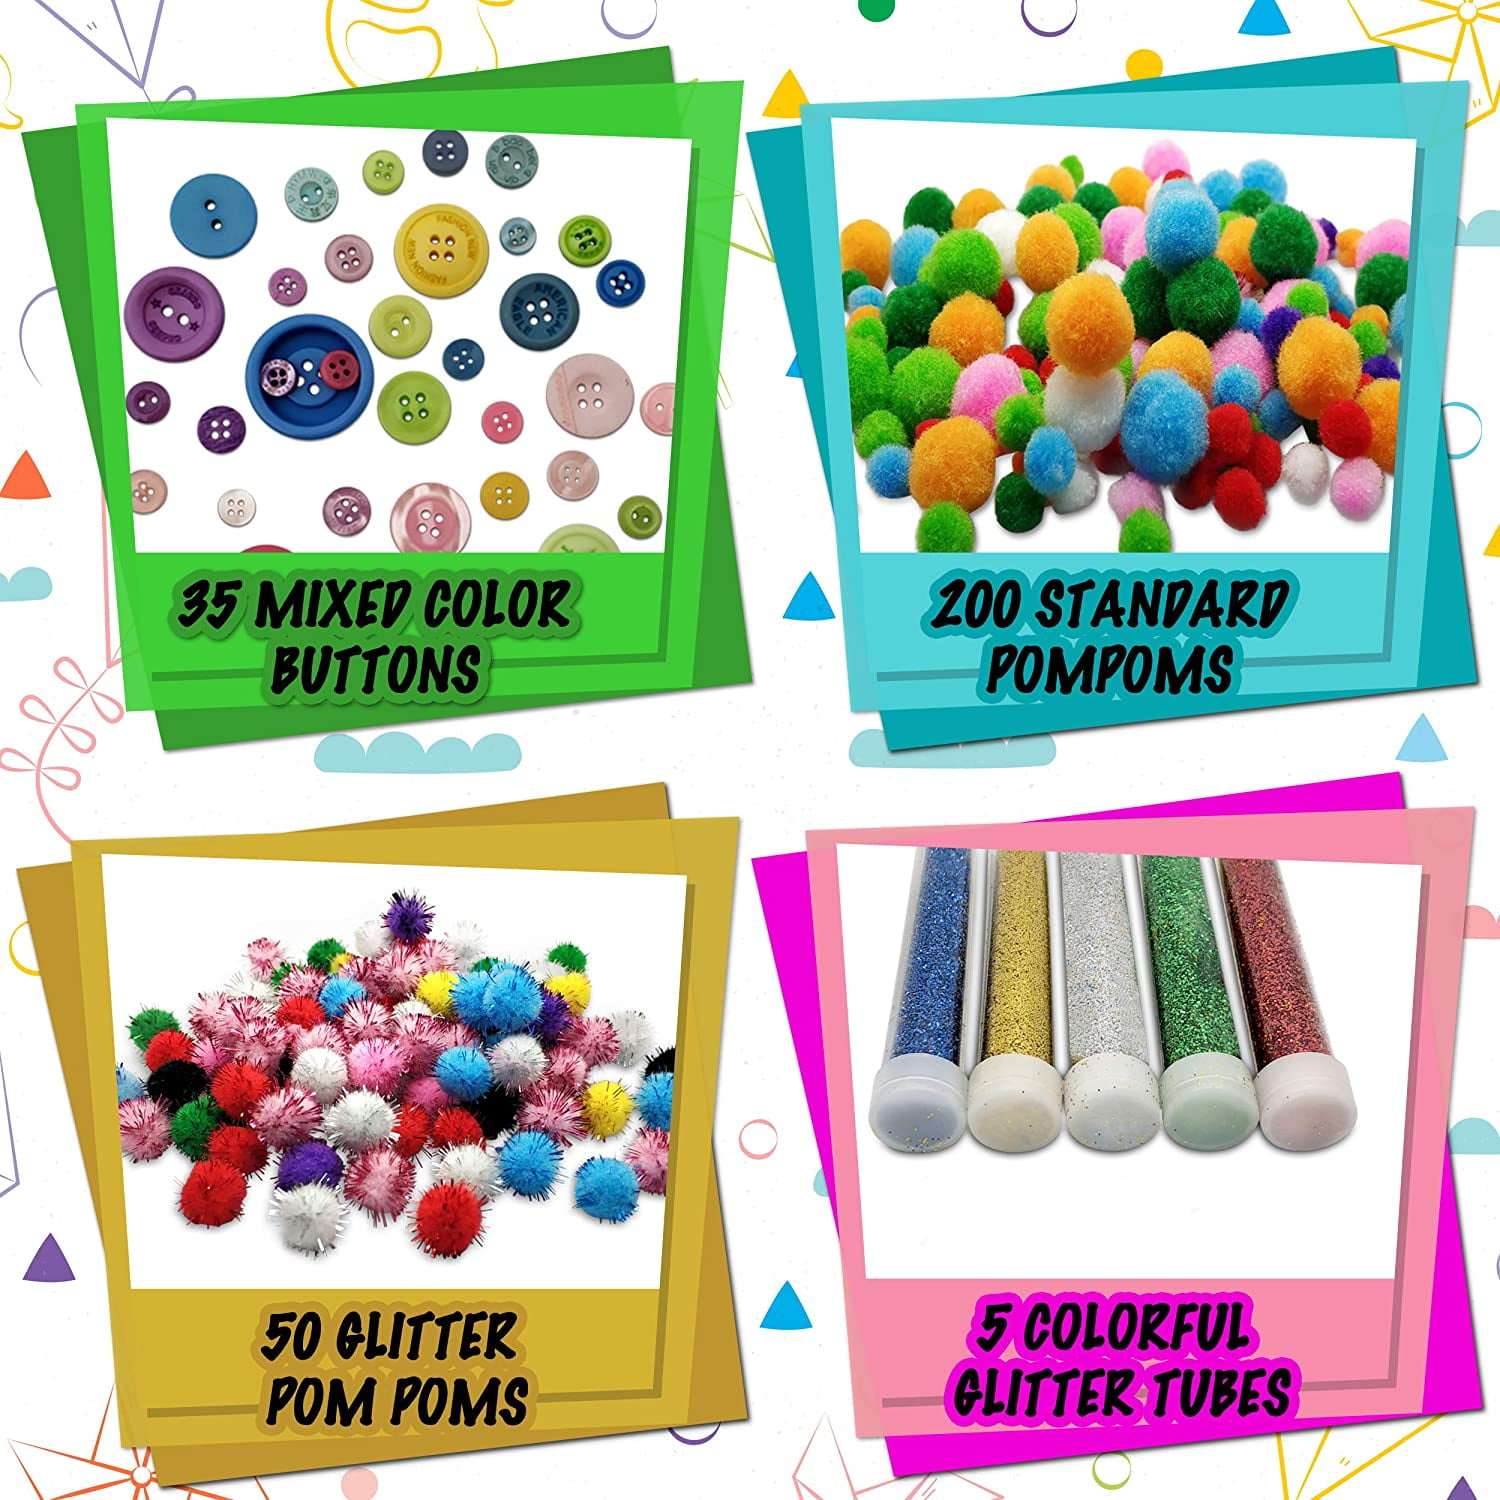 Art & Crafts Materials, Craft Kits for Kids, Craft Kits for Adults, Crafts  Supplies, Make at Home Crafts, DIY Craft Kits - Cromartie Hobbycraft Limited